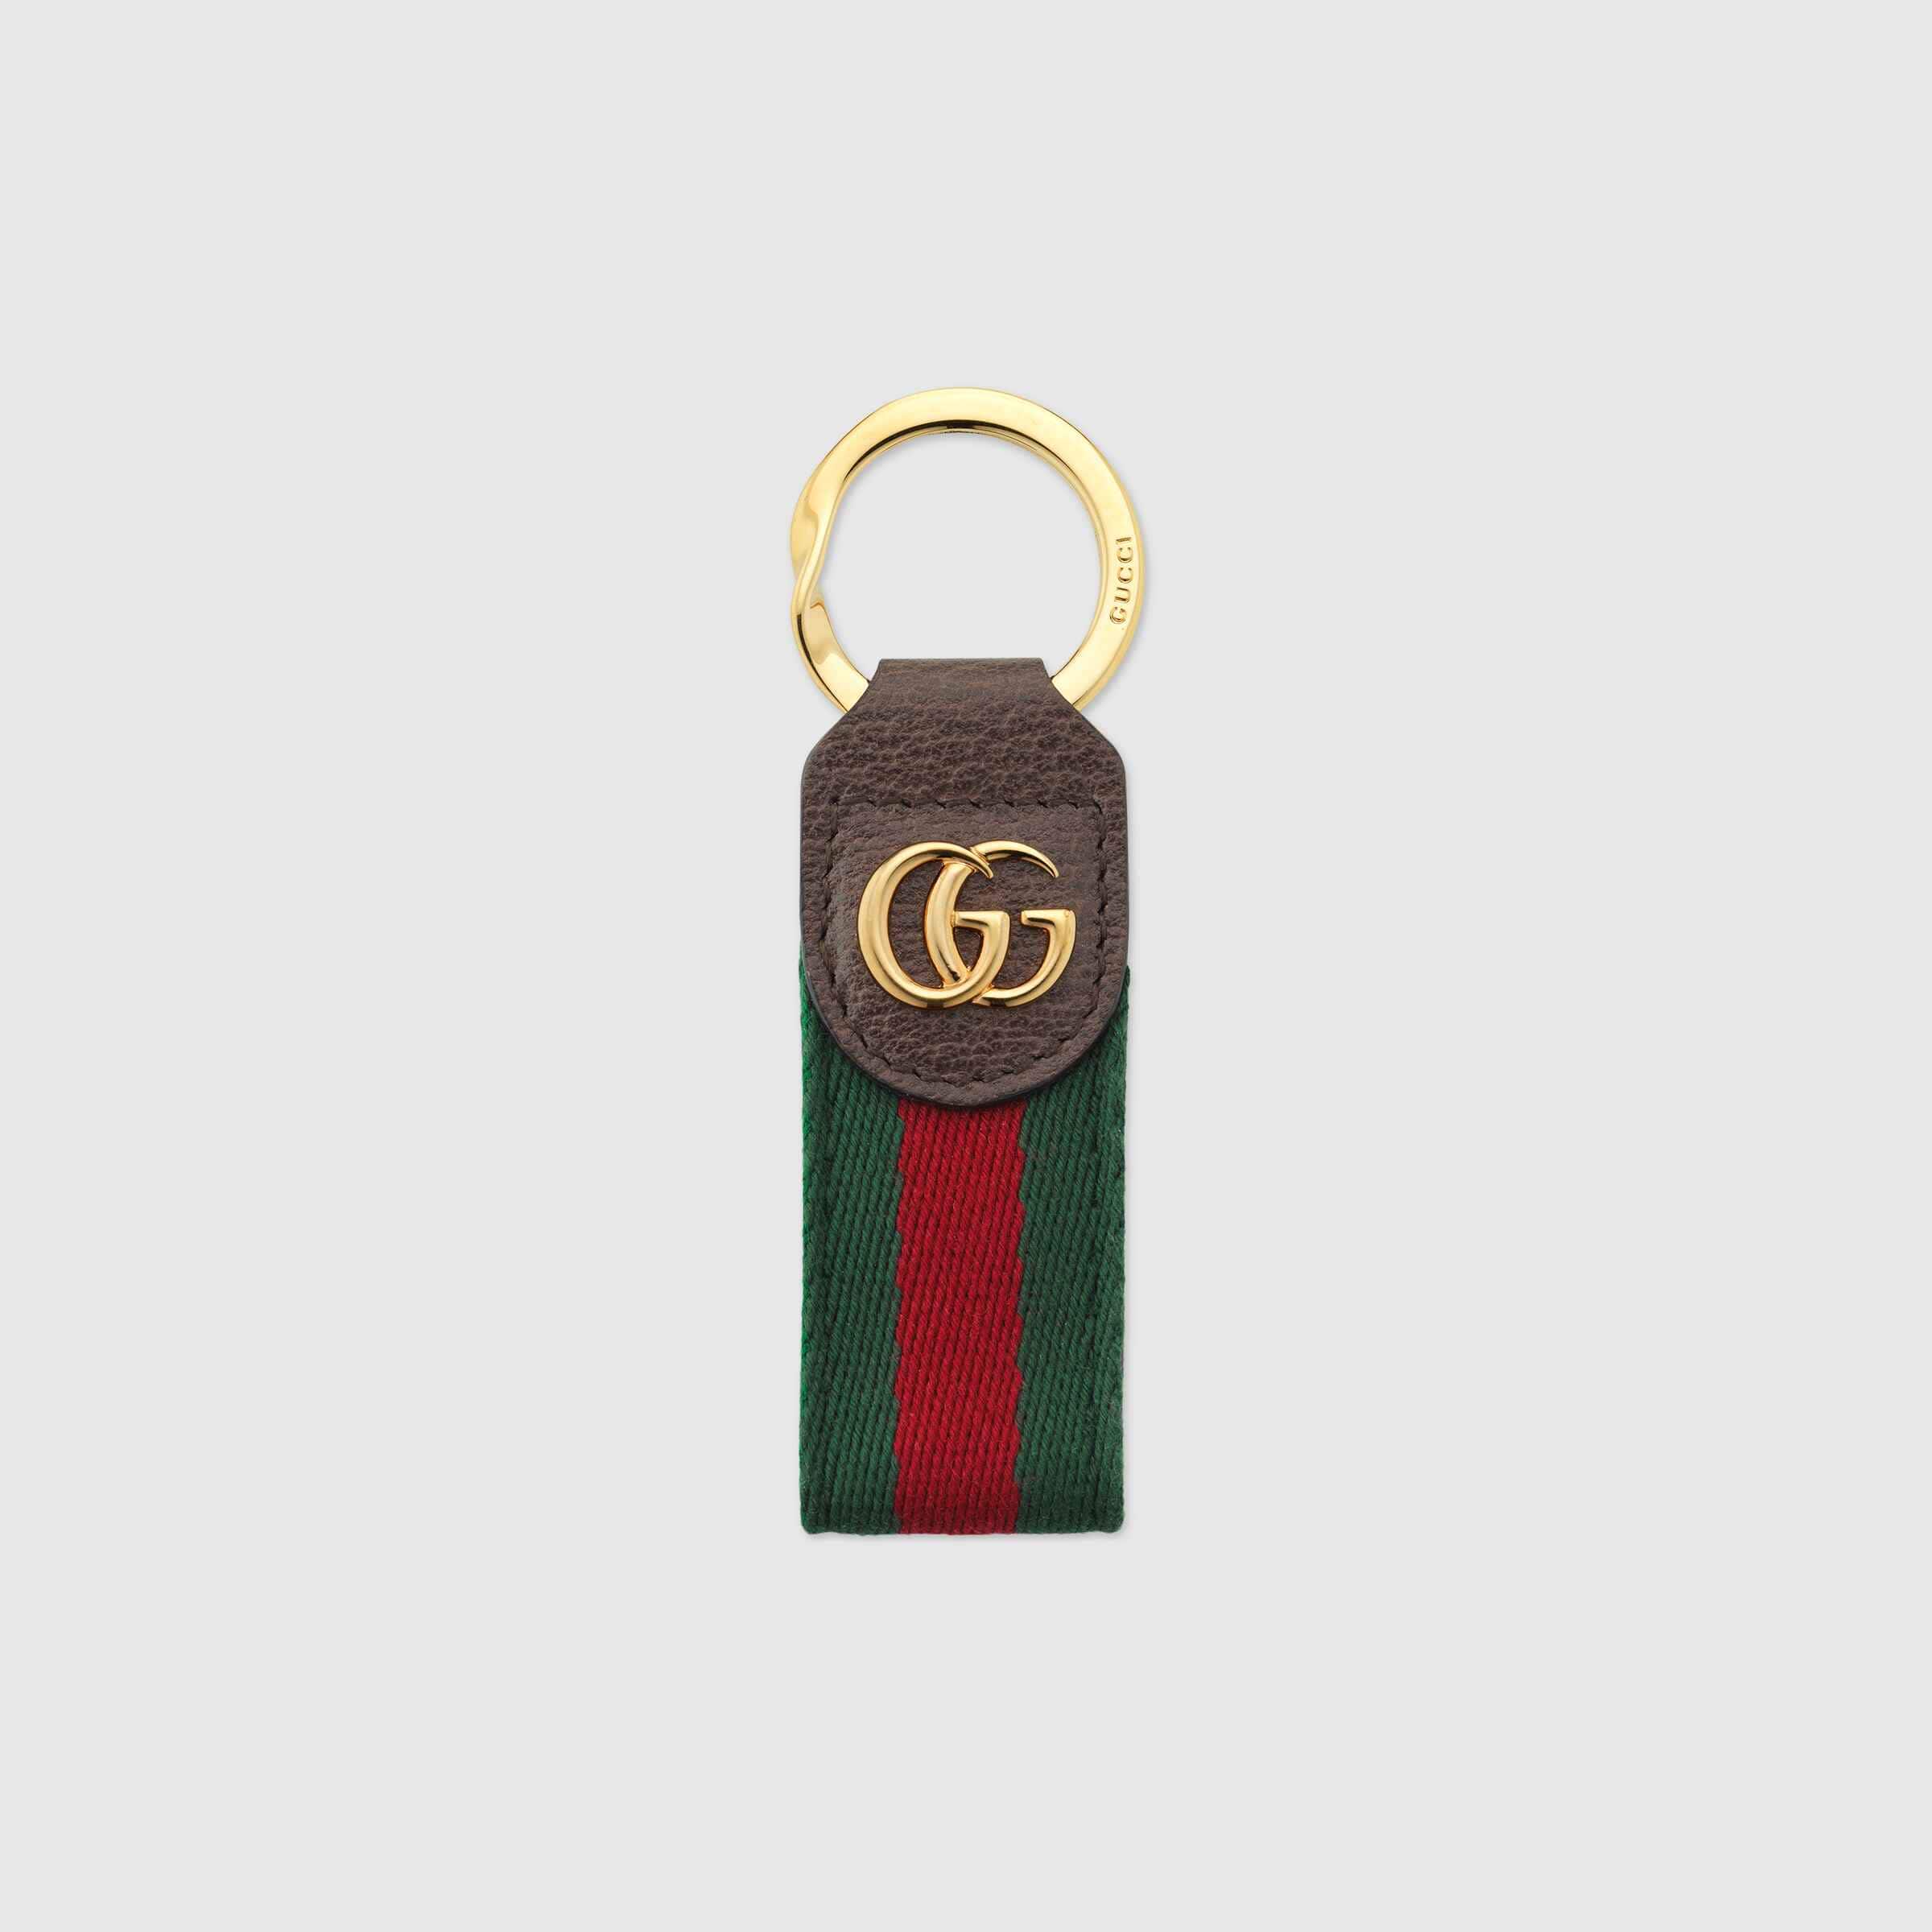 Cheap Gucci Items, Under $40